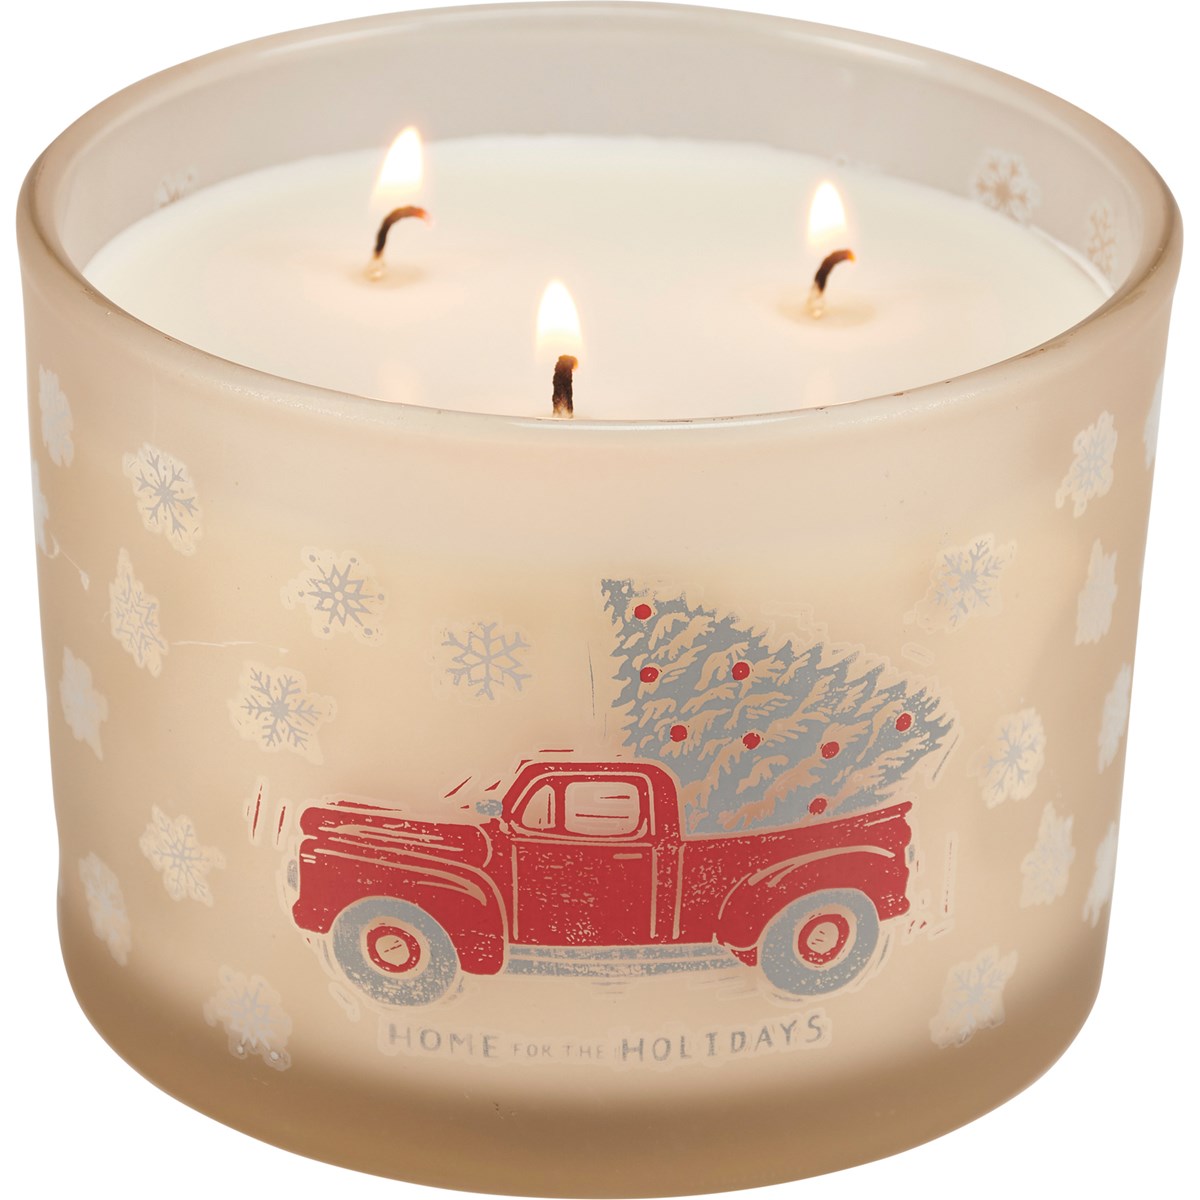 Home For The Holidays Candle - Soy Wax, Glass, Cotton